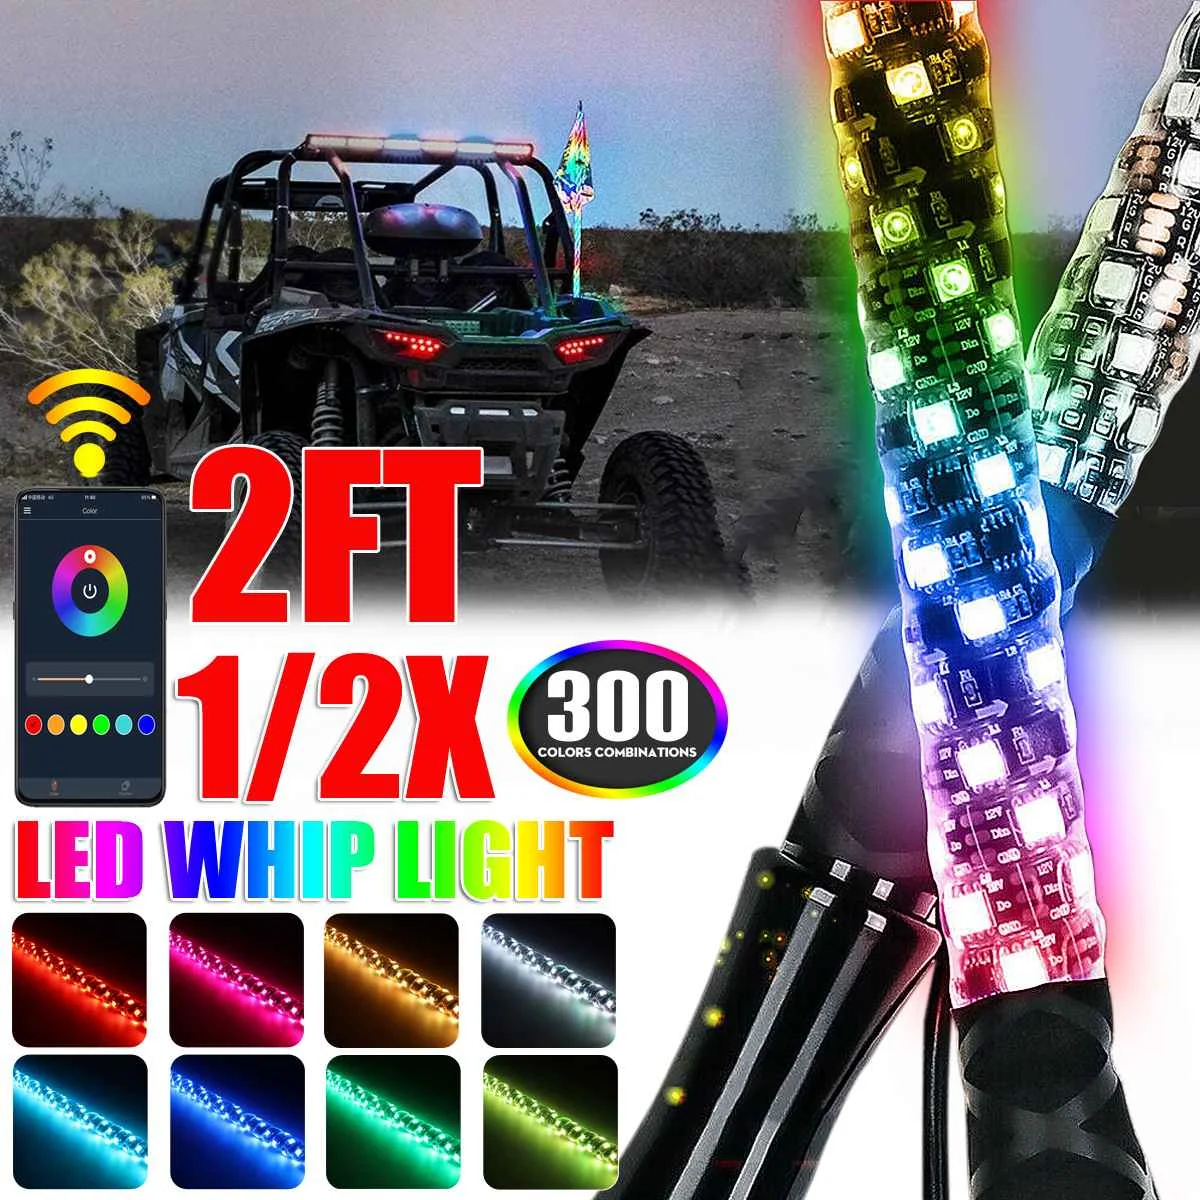 

1 Pair 2FT RGB Whip Light with Base Waterproof Bendable Wireless Remote Control Flagpole LED Lamp Light DC12V bluebooth Control